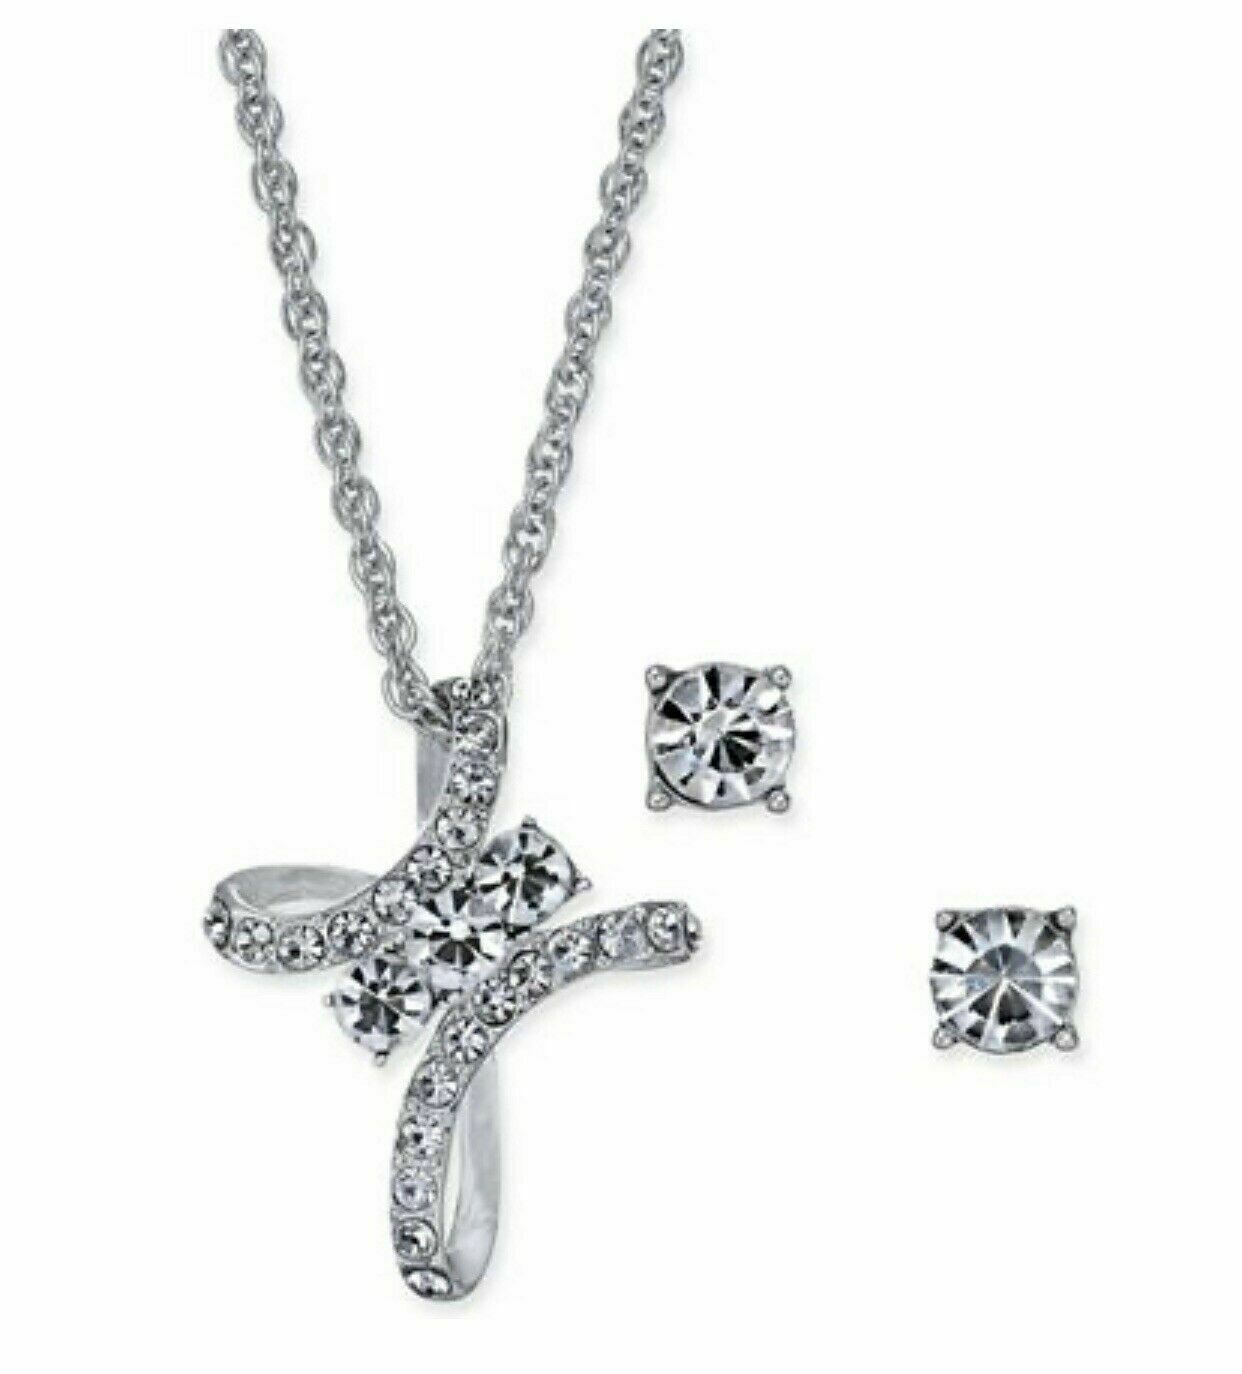 Charter Club Silver-Tone Crystal Cross Pendant Necklace & Earring Set New in Box - $12.99